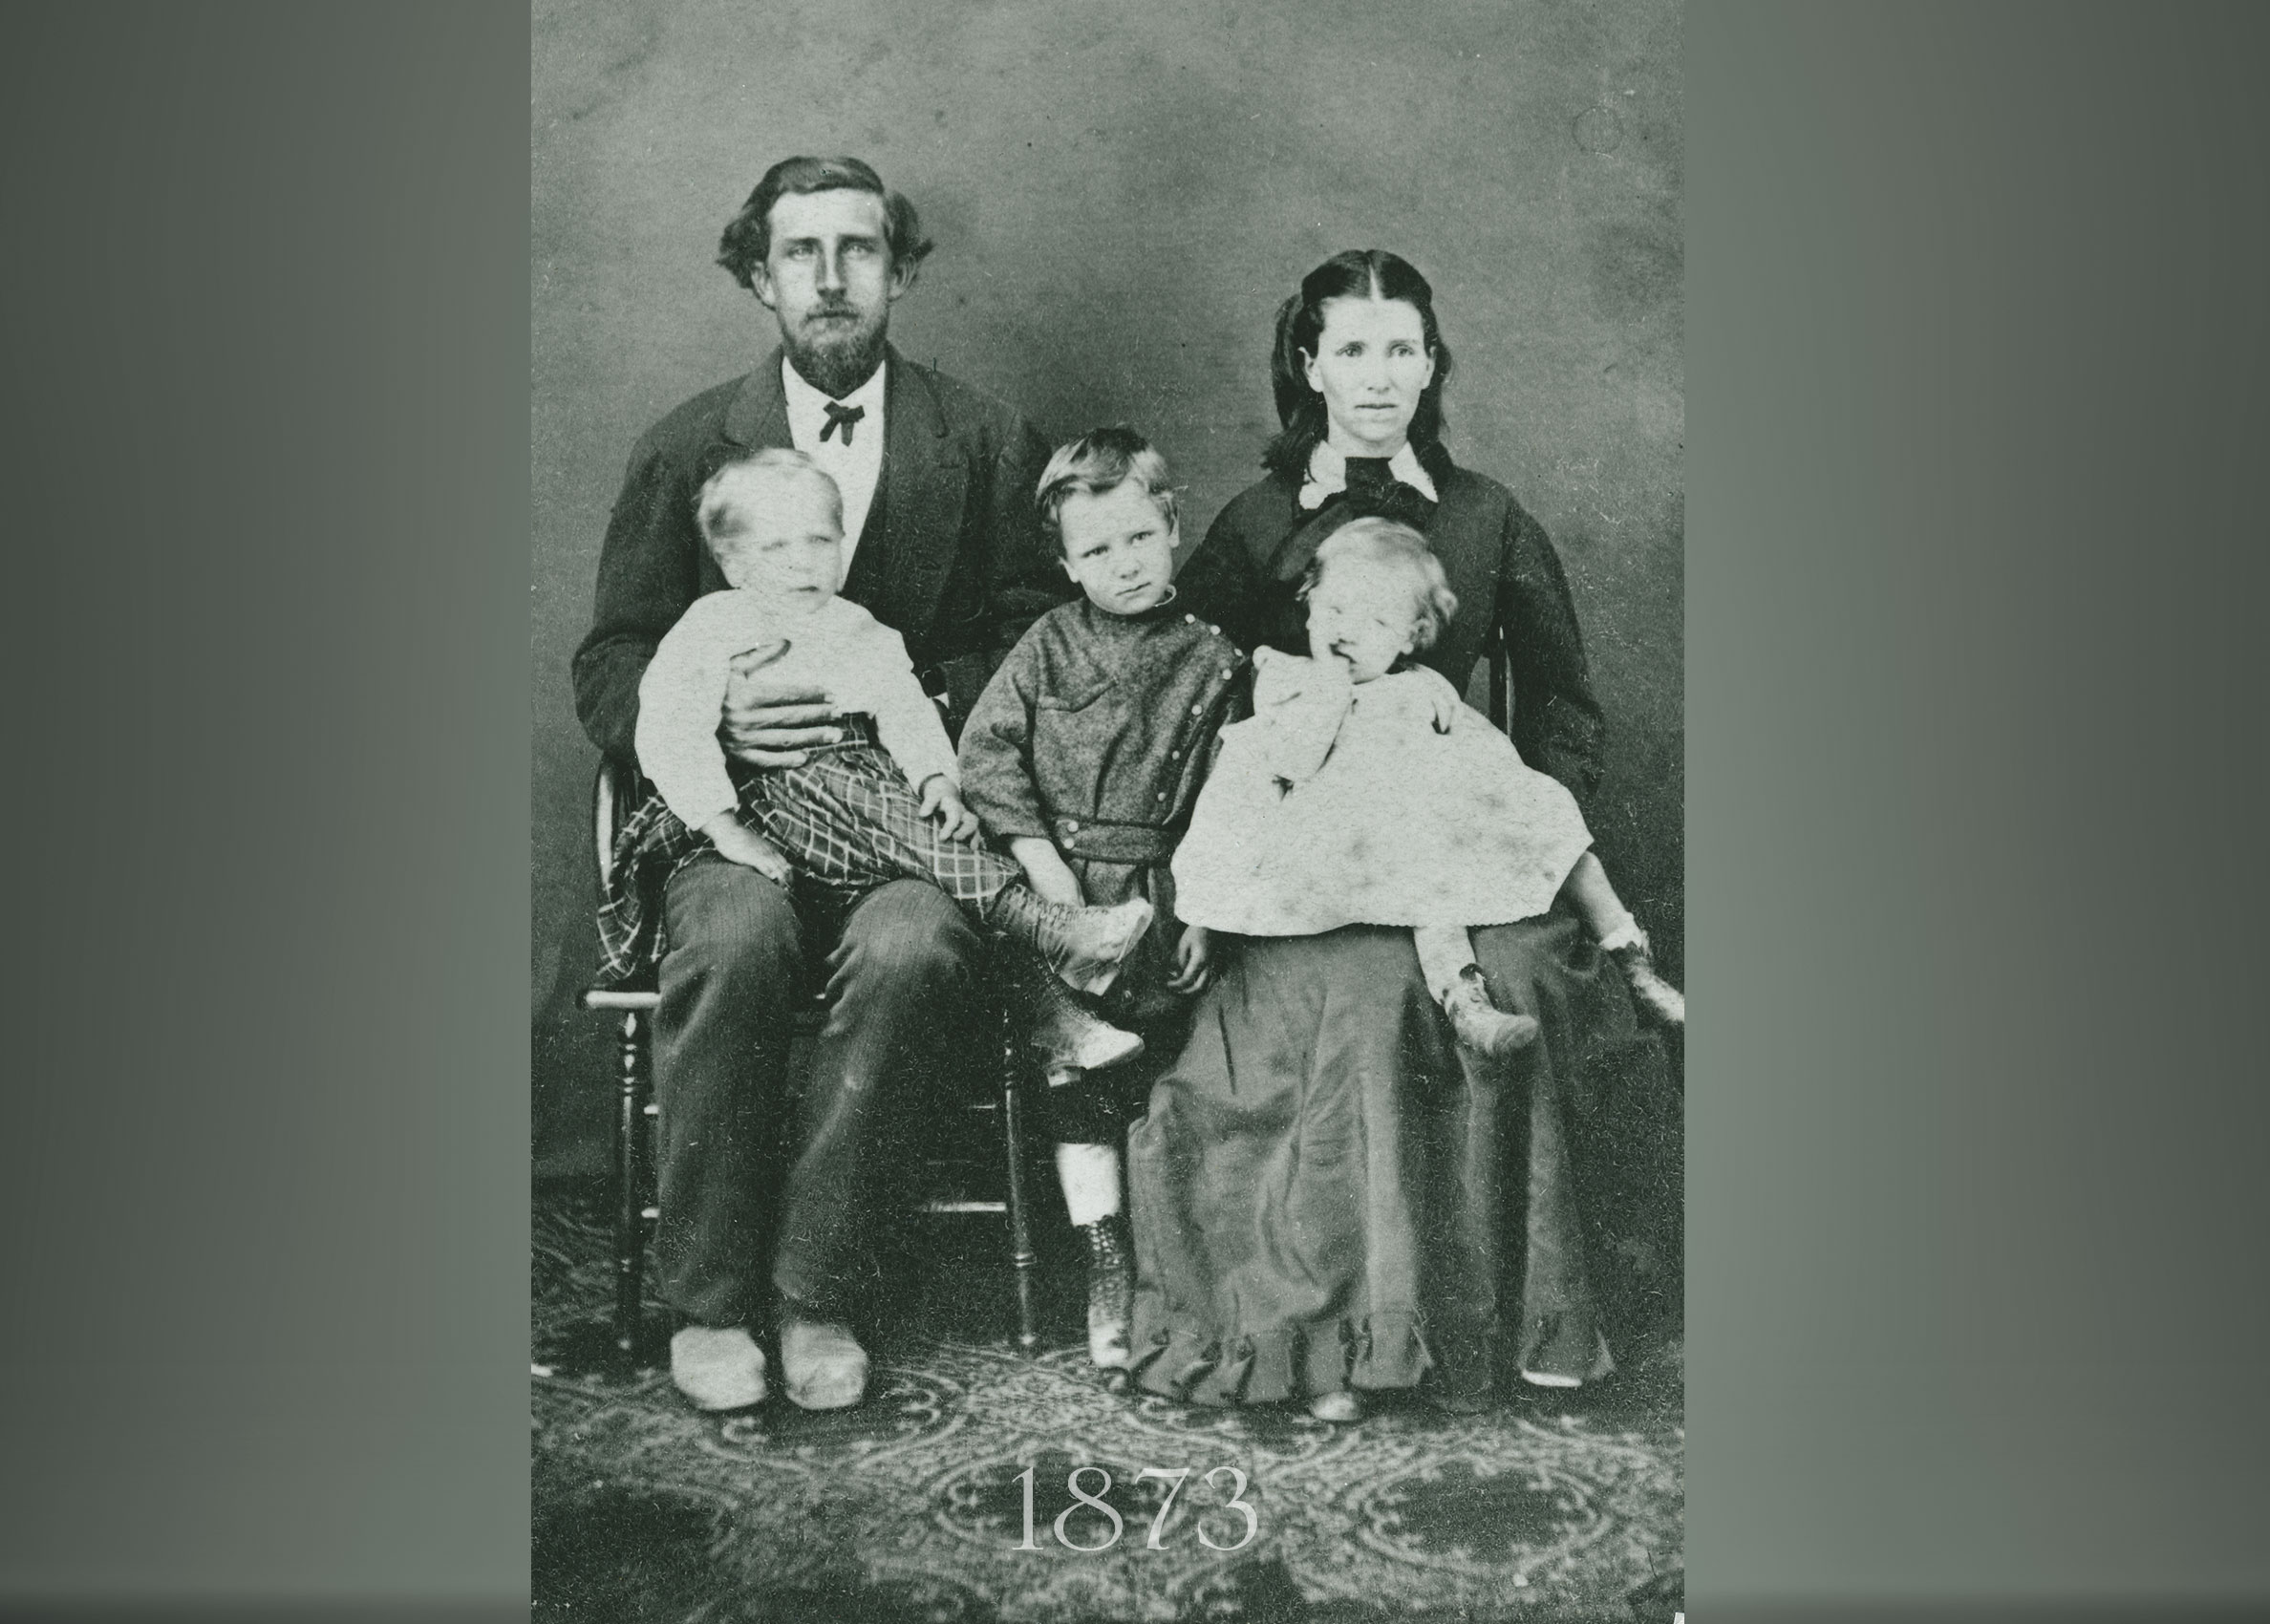 Early settlers of what is now Cain Vineyard, Henry Mixer McCormick and Molly Hudson McCormick with three of their five children, taken around 1873. John is sitting on Henry's lap.